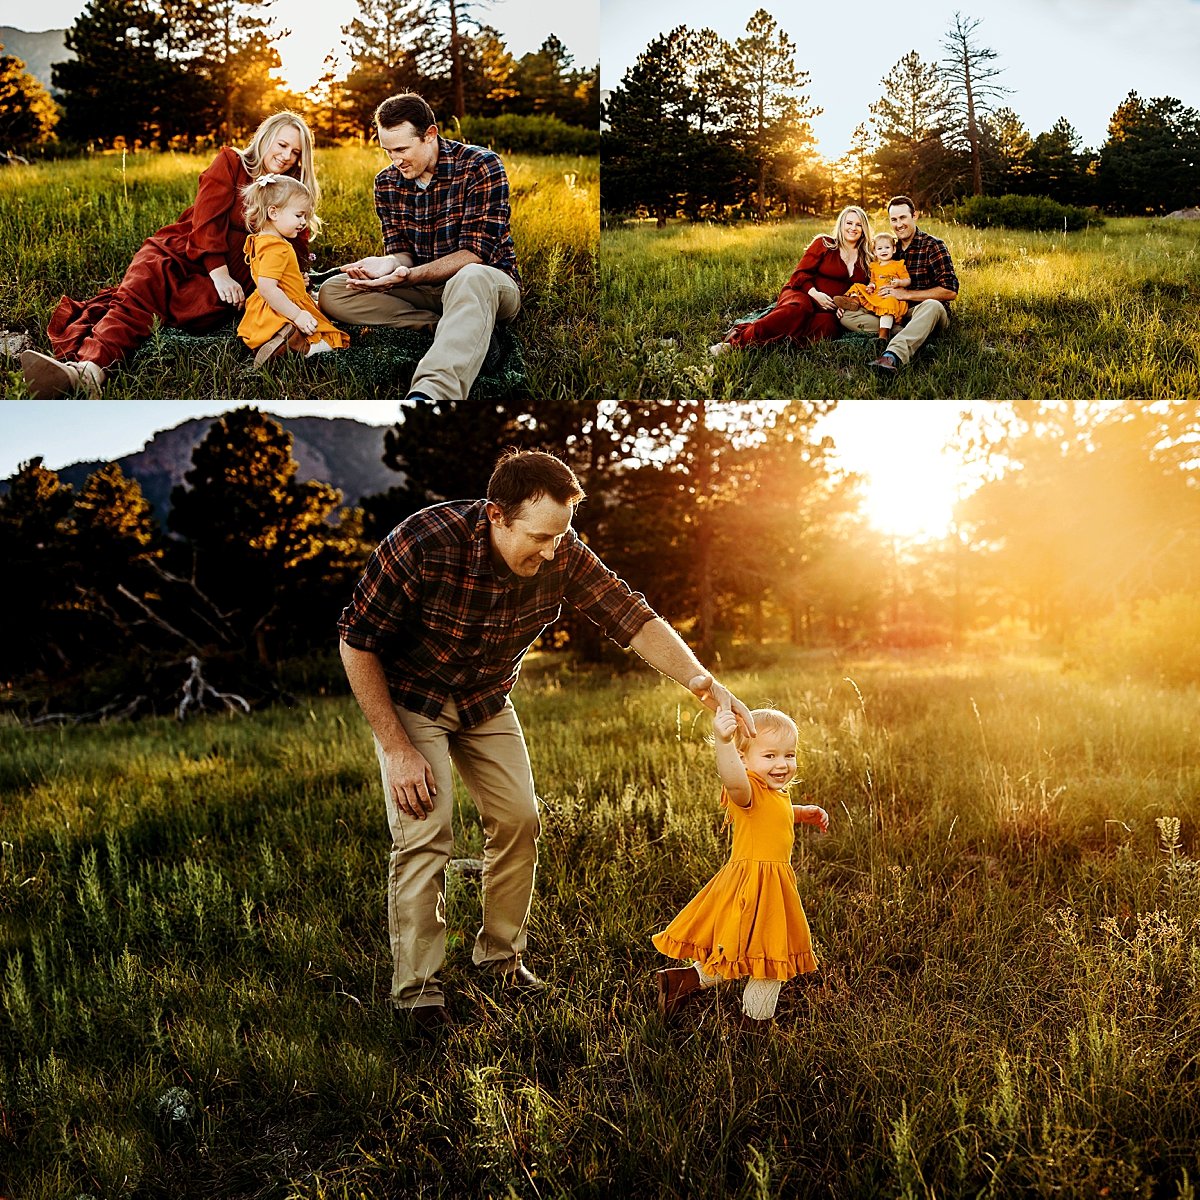  Dad twirling daughter in field at sunset in yellow dress by Christa paustenbaugh photography 